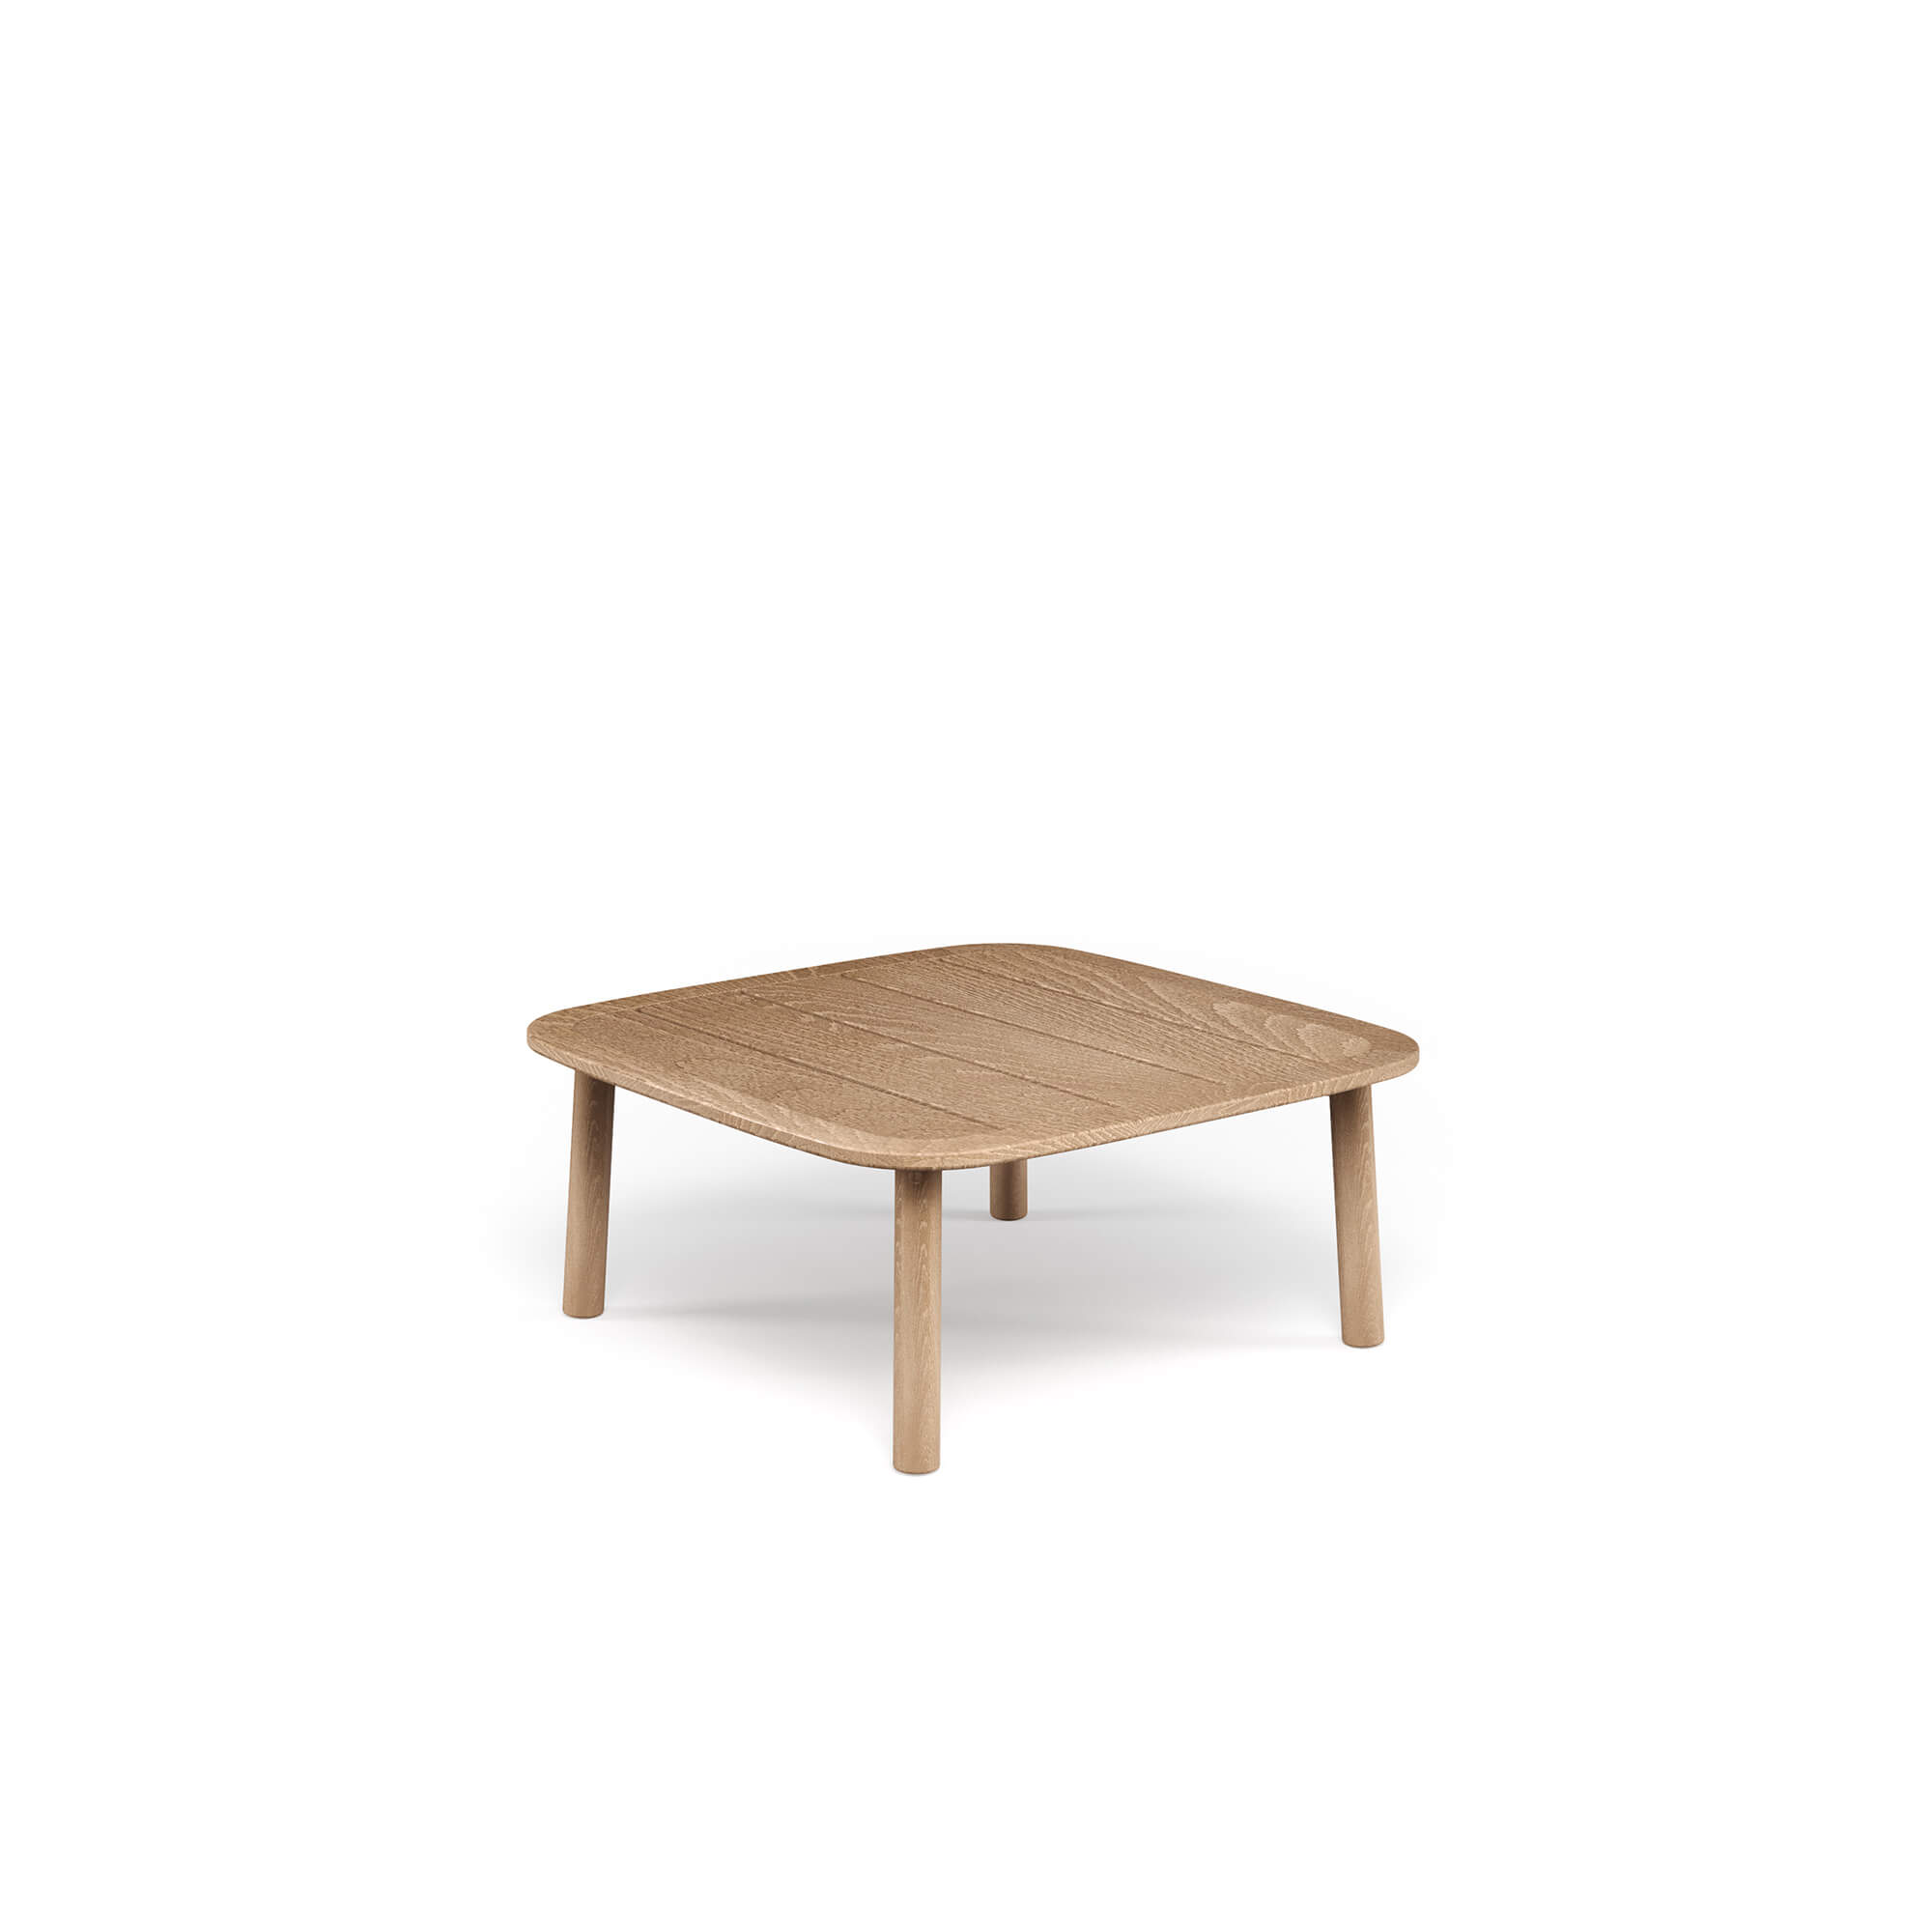 Garden coffee table / outside in Teak - Collection Twins